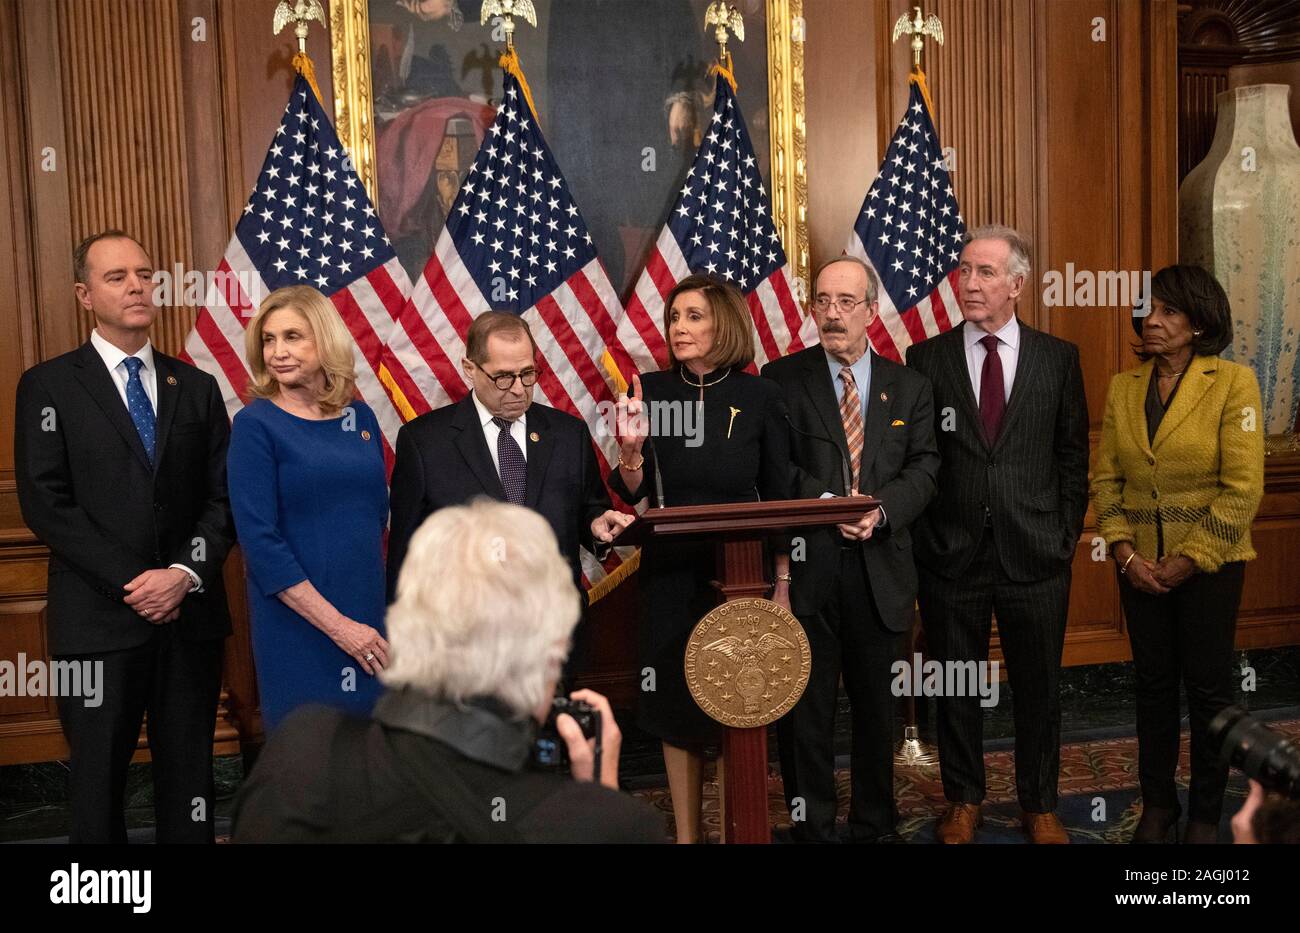 Speaker of the United States House of Representatives Nancy Pelosi (Democrat of California), center, holds a press conference following the vote on the two articles of impeachment against US President Donald J. Trump in the US Capitol in Washington, DC on Wednesday, December 18, 2019. From left to right: United States Representative Adam Schiff (Democrat of California), Chairman, US House Permanent Select Committee on Intelligence; United States Representative Carolyn Maloney (Democrat of New York), Chair, US House Oversight Committee; United States Representative Jerrold Nadler (Democrat of Stock Photo